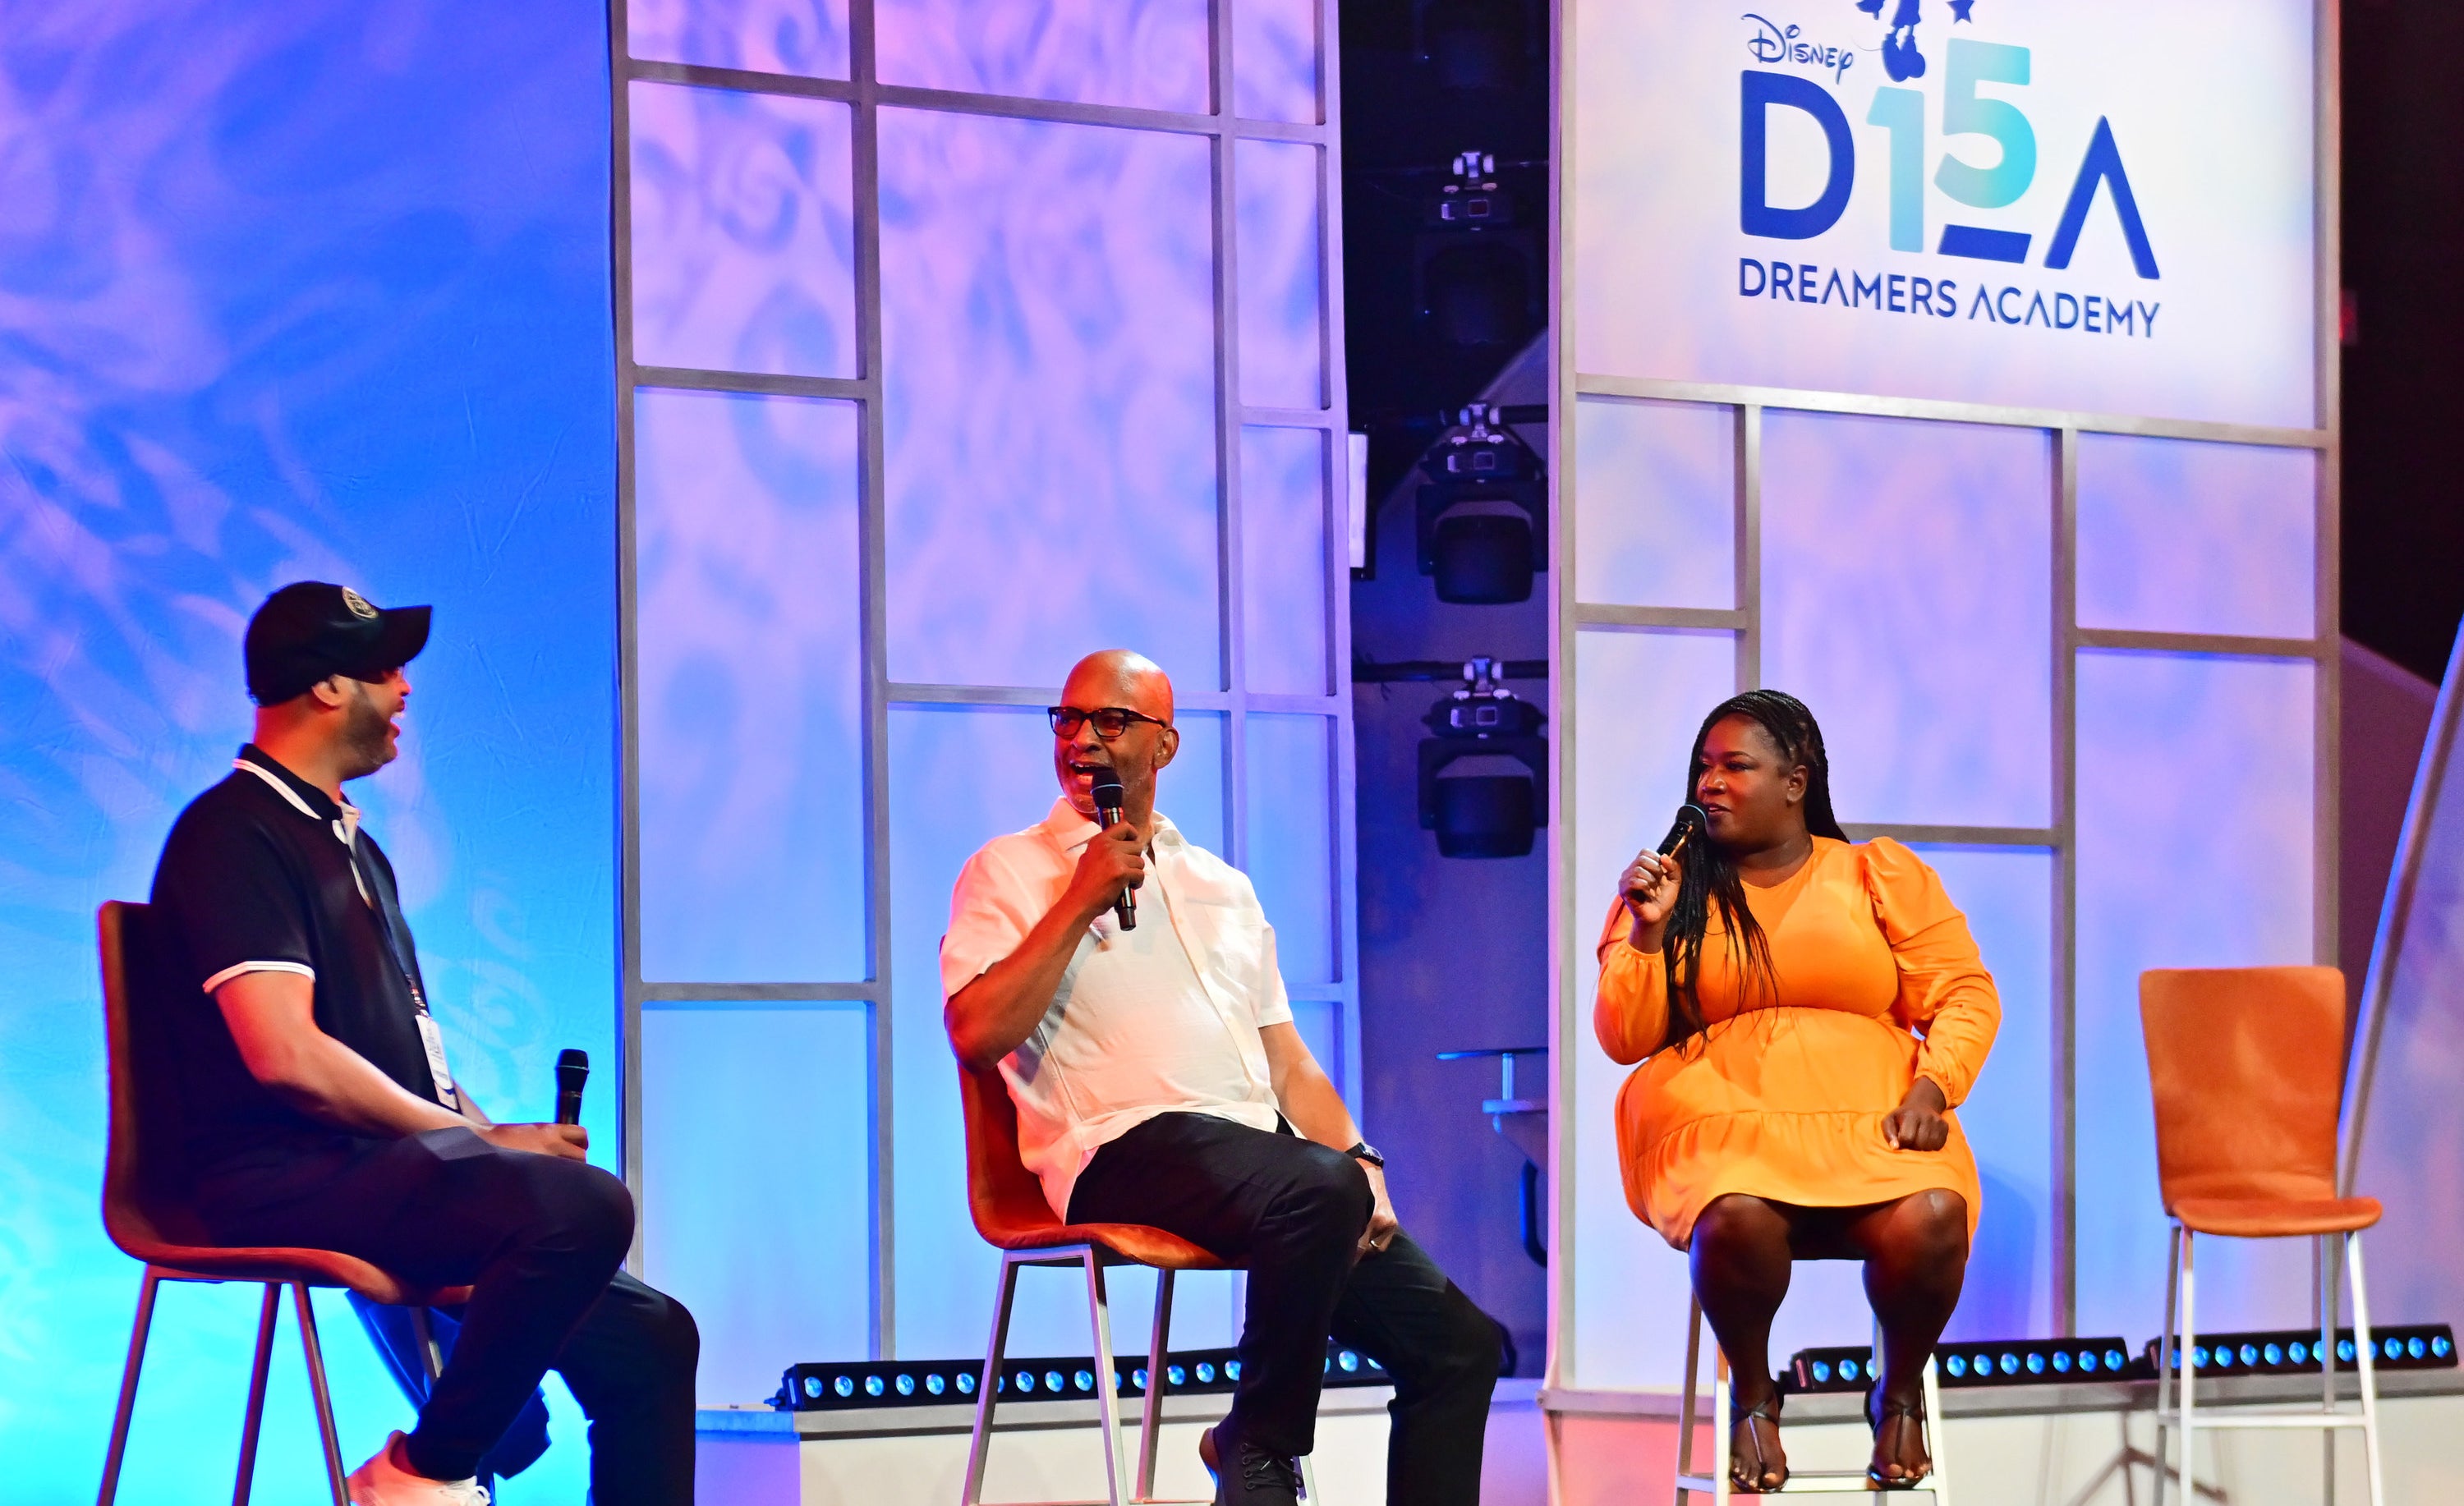 Bruce Smith and Ralph Farquhar speak on stage at the Disney Dreamers Academy.